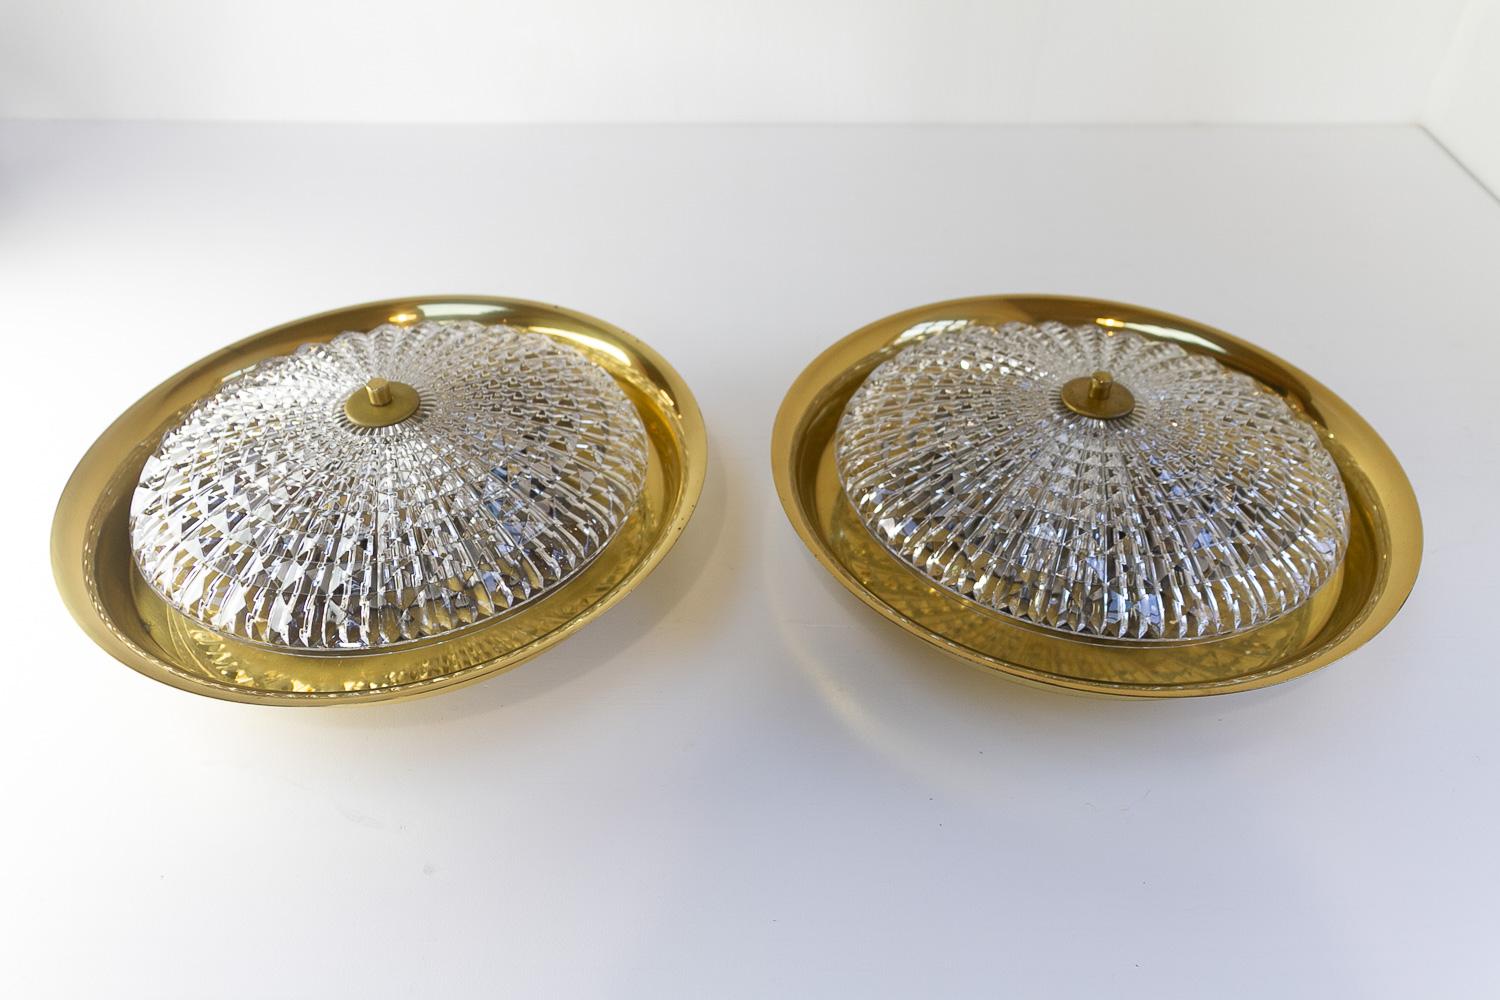 Orrefors Wall or Ceiling Lamps by Fagerlund for Lyfa, 1960s. Set of 2.
Pair of Scandinavian Mid-Century Modern lights with clear textured thick crystal shade and brass body.
Produced by Lyfa Denmark, designed by Carl Fagerlund and crystal glass